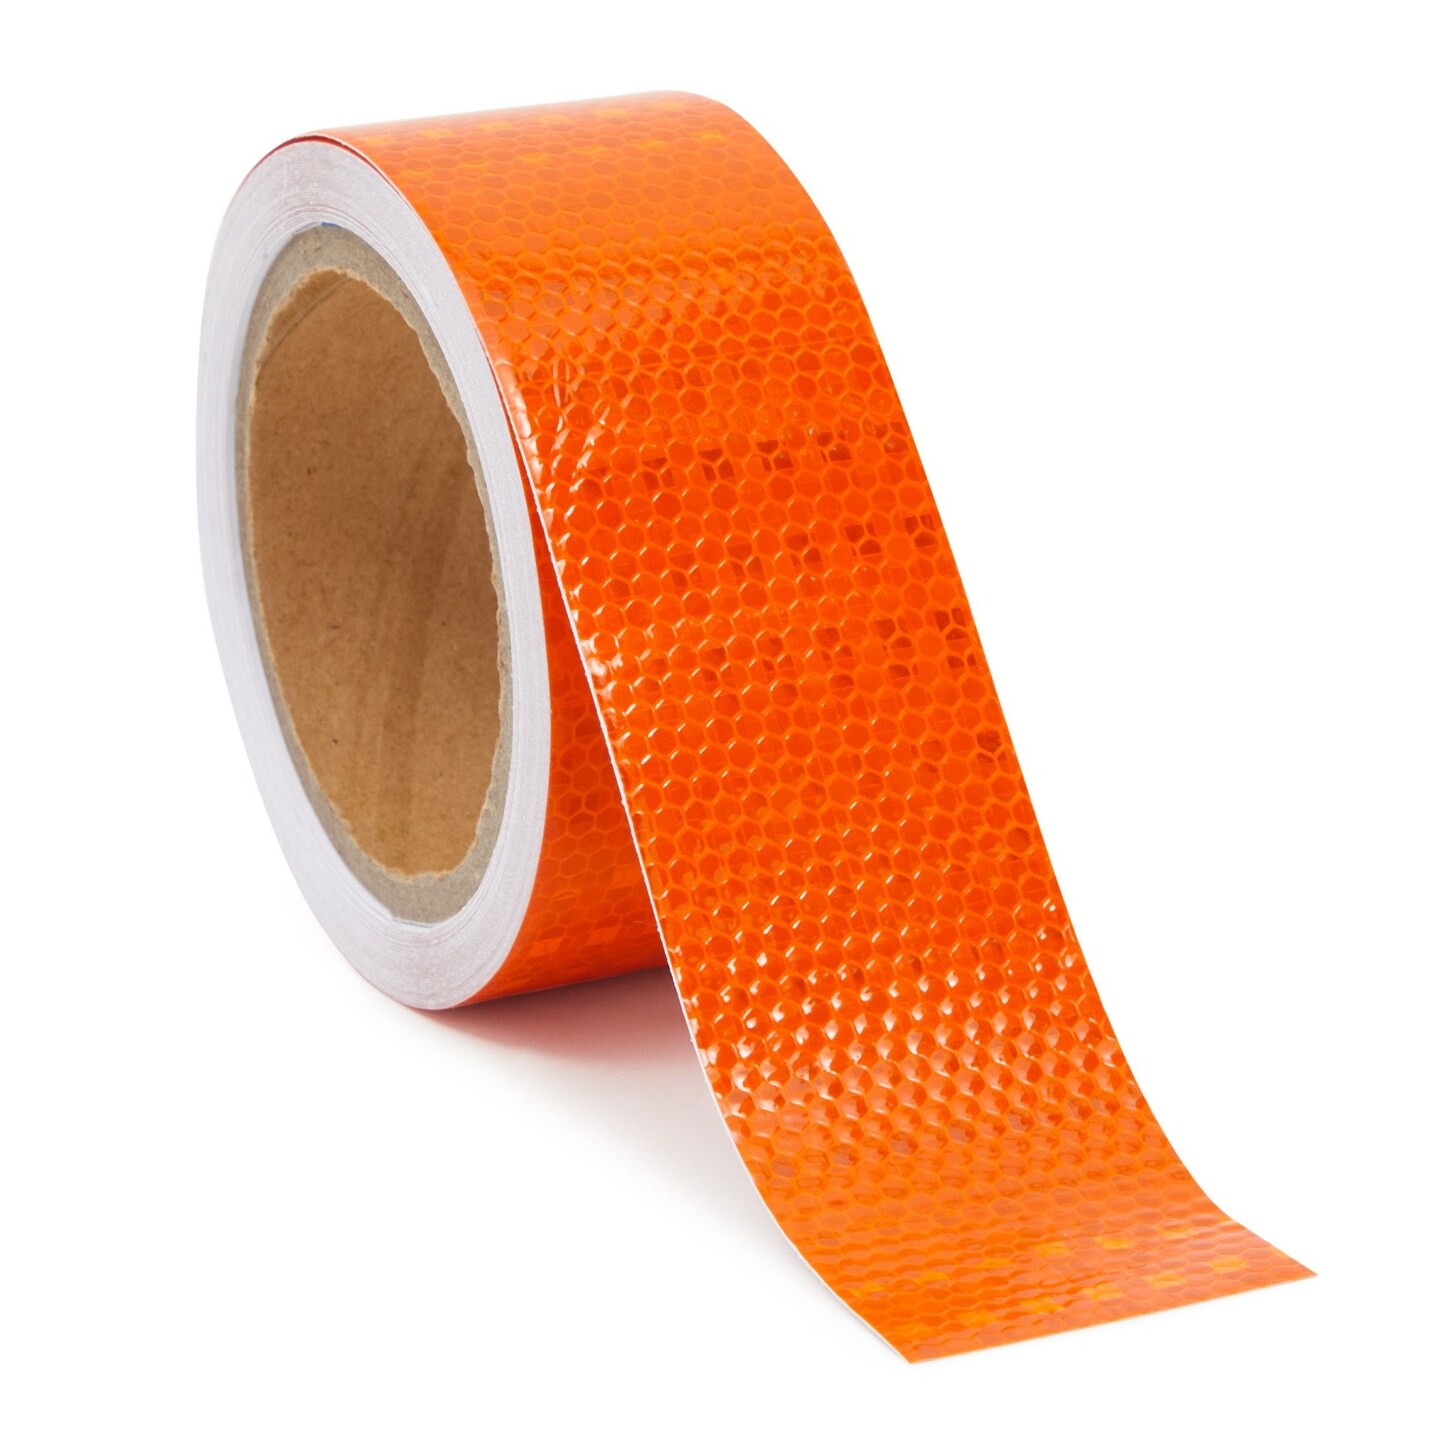 Wholesale reflective tape for clothing Optimal Brightness and